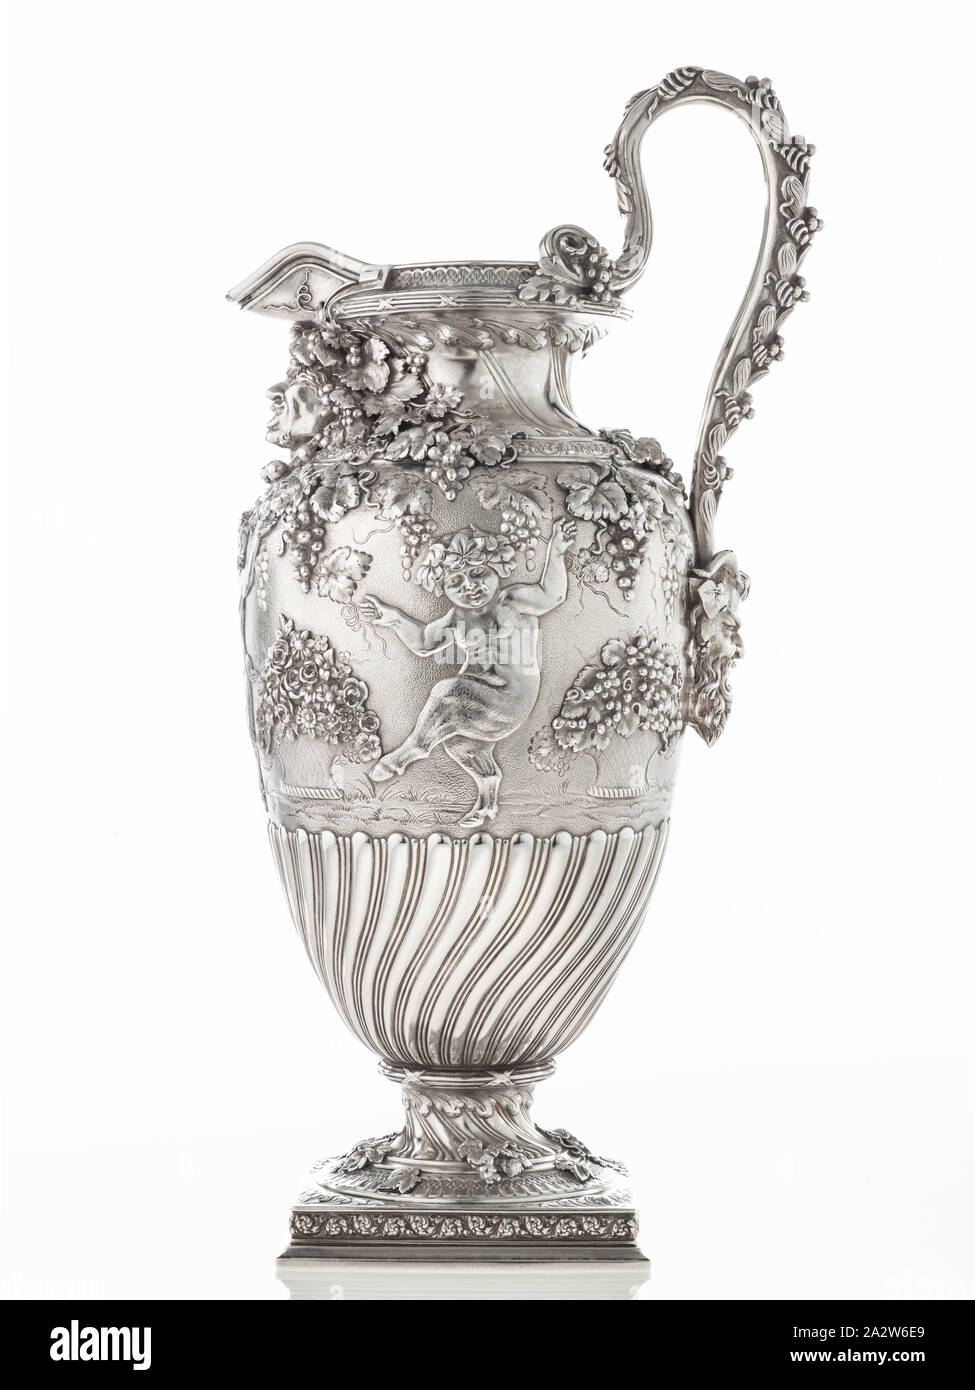 wine ewer, Tiffany & Co., Manufacturer (American), about 1890, silver, 18-1/2 x 7-1/4 x 9-3/4 in., Inscribed, at underside: Thomas Horncastle Esquire Presented by the Mutual Life Insurance Company of New York Jan 1 1890 Inscribed, at underside in center: Tiffany & Co. 5659 Makers 7117/ STERLING SILVER/ 925-1000/ M, 5Q'TS Inscribed, scratched at underside: 116/85 589, 461698, Decorative Arts Stock Photo